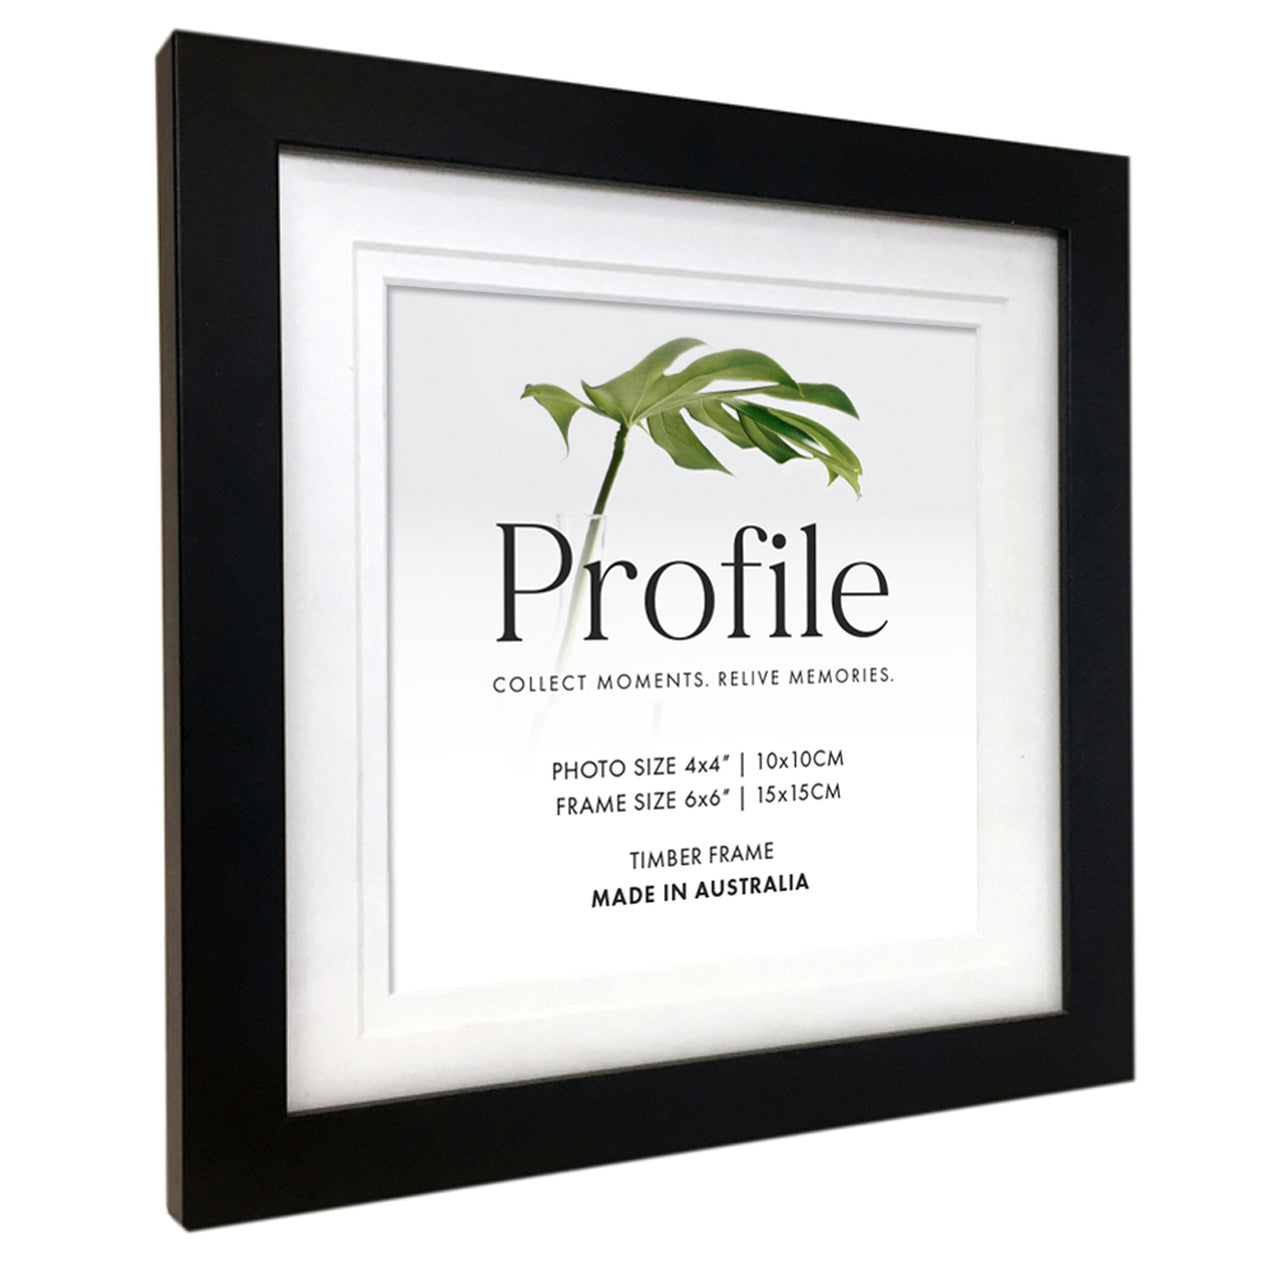 Deluxe Black 8x8 Photo Frame with 5x5 opening